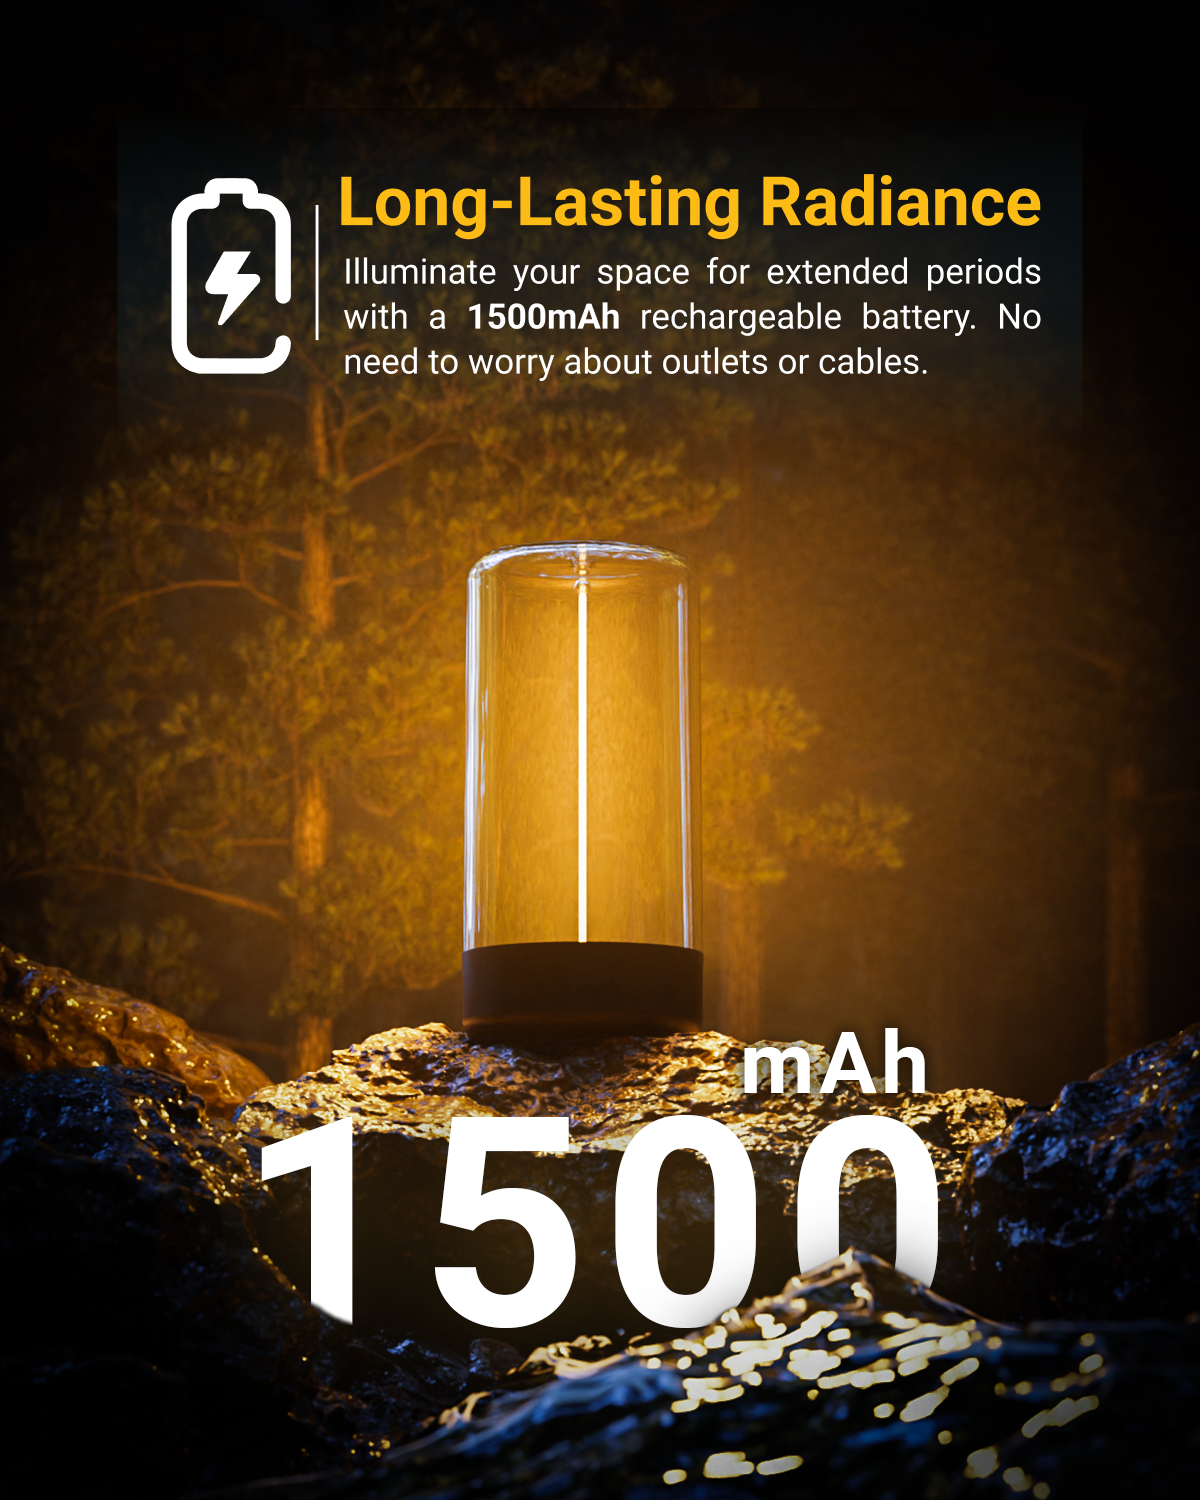 Enjoy long-lasting illumination and save on energy costs while reducing your environmental footprint.